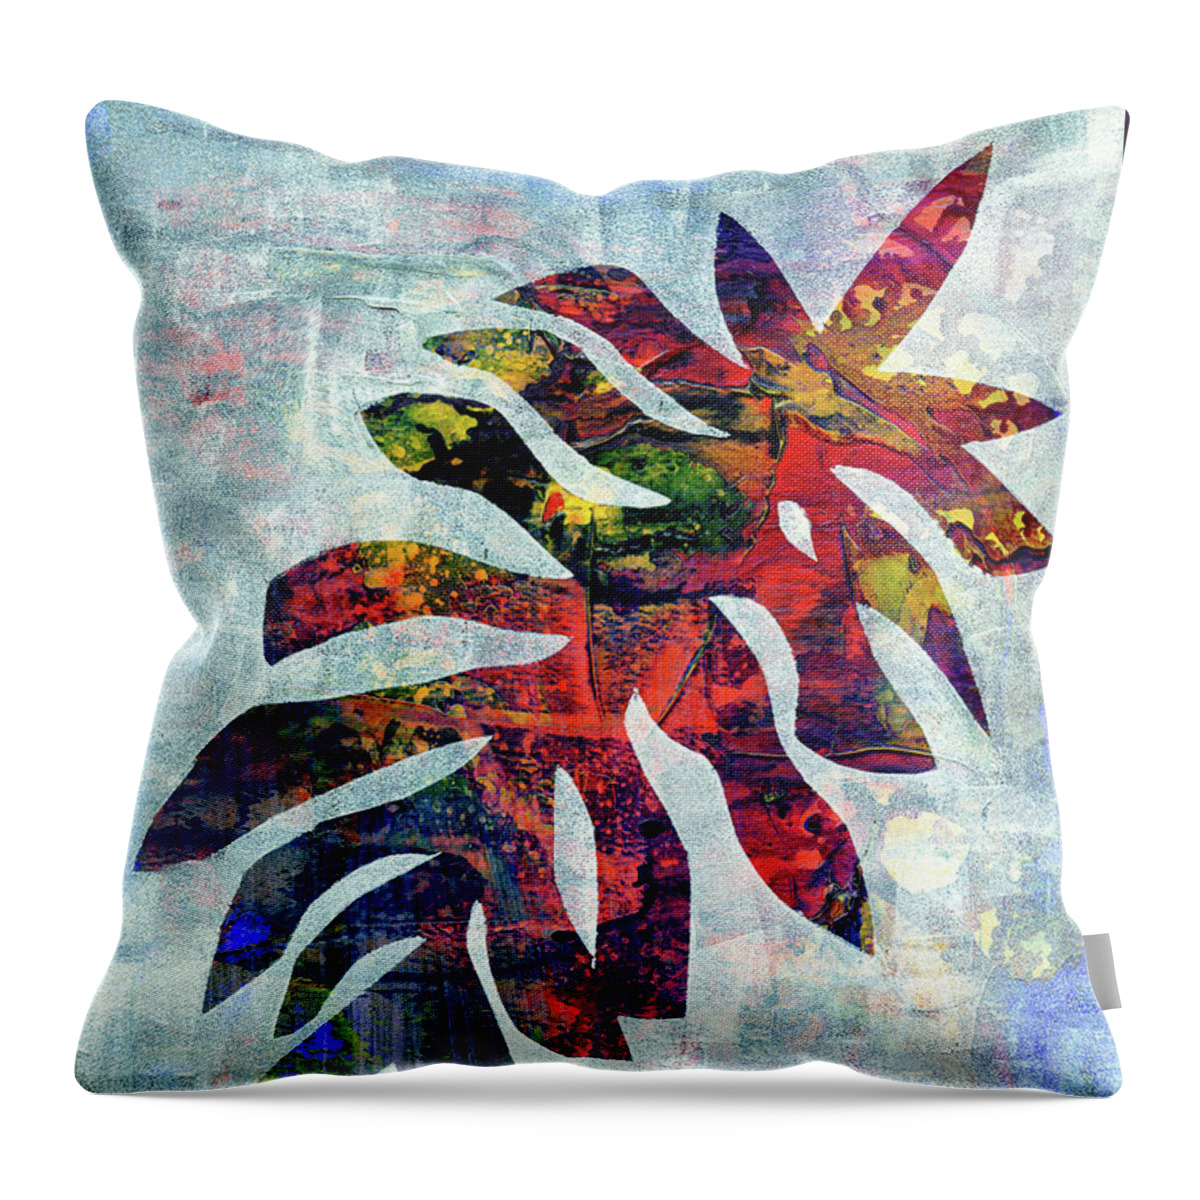 Mid Mod Throw Pillow featuring the painting Boulevard Palm by Cynthia Fletcher